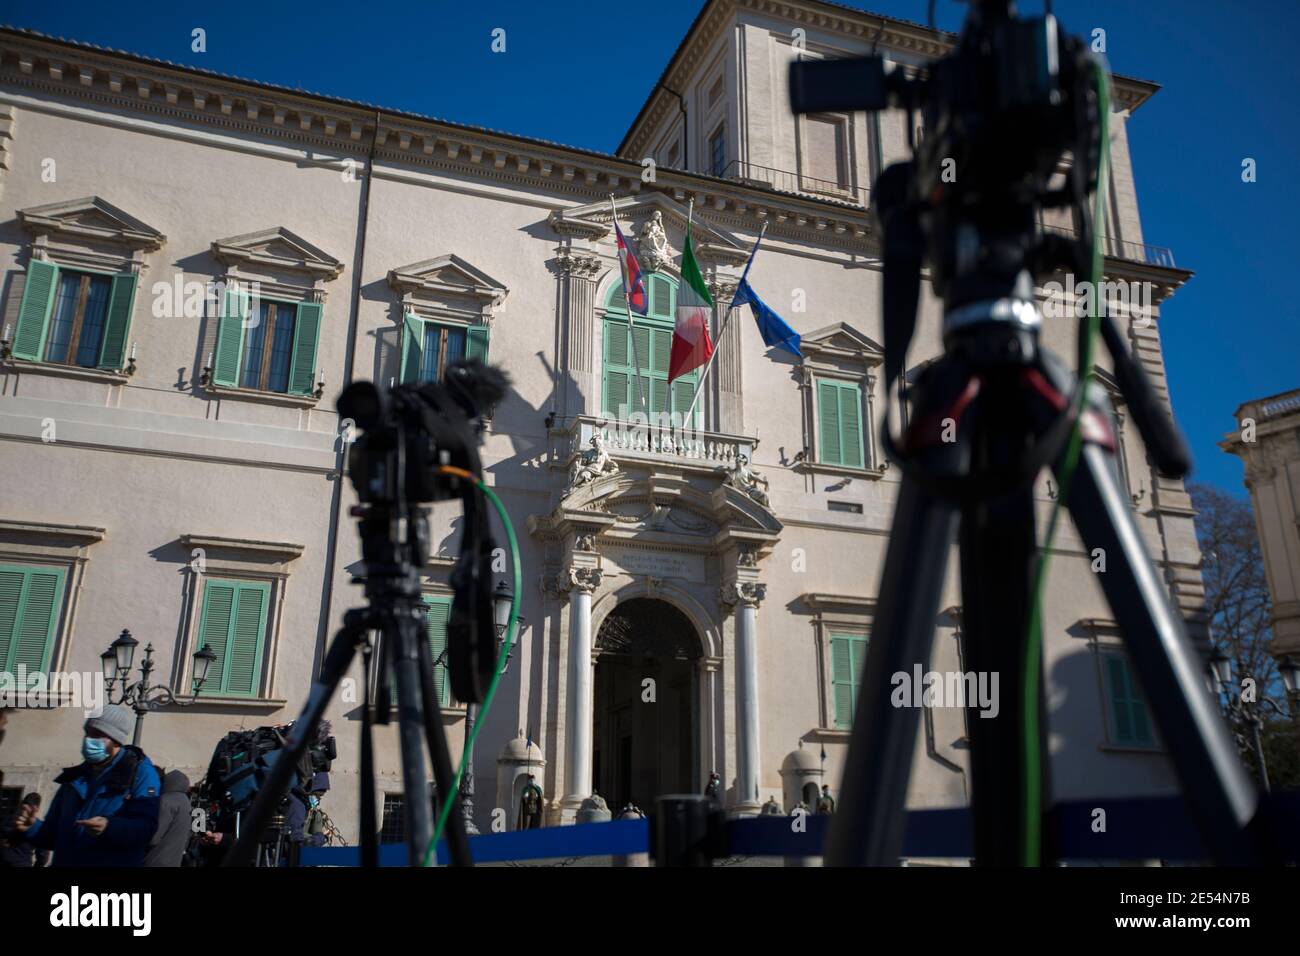 Rome, 26/01/2021. Italian Prime Minister Giuseppe Conte visits the Palazzo del Quirinale to hand his resignation to the President of the Republic, Sergio Mattarella. The Italian Government crisis has begun last week after the defection of the two Cabinet ministers belonging to the tiny party, Italia Viva (Italy Alive), led by former Italian Prime Minister Matteo Renzi. Credit: LSF Photo/Alamy Live News Stock Photo